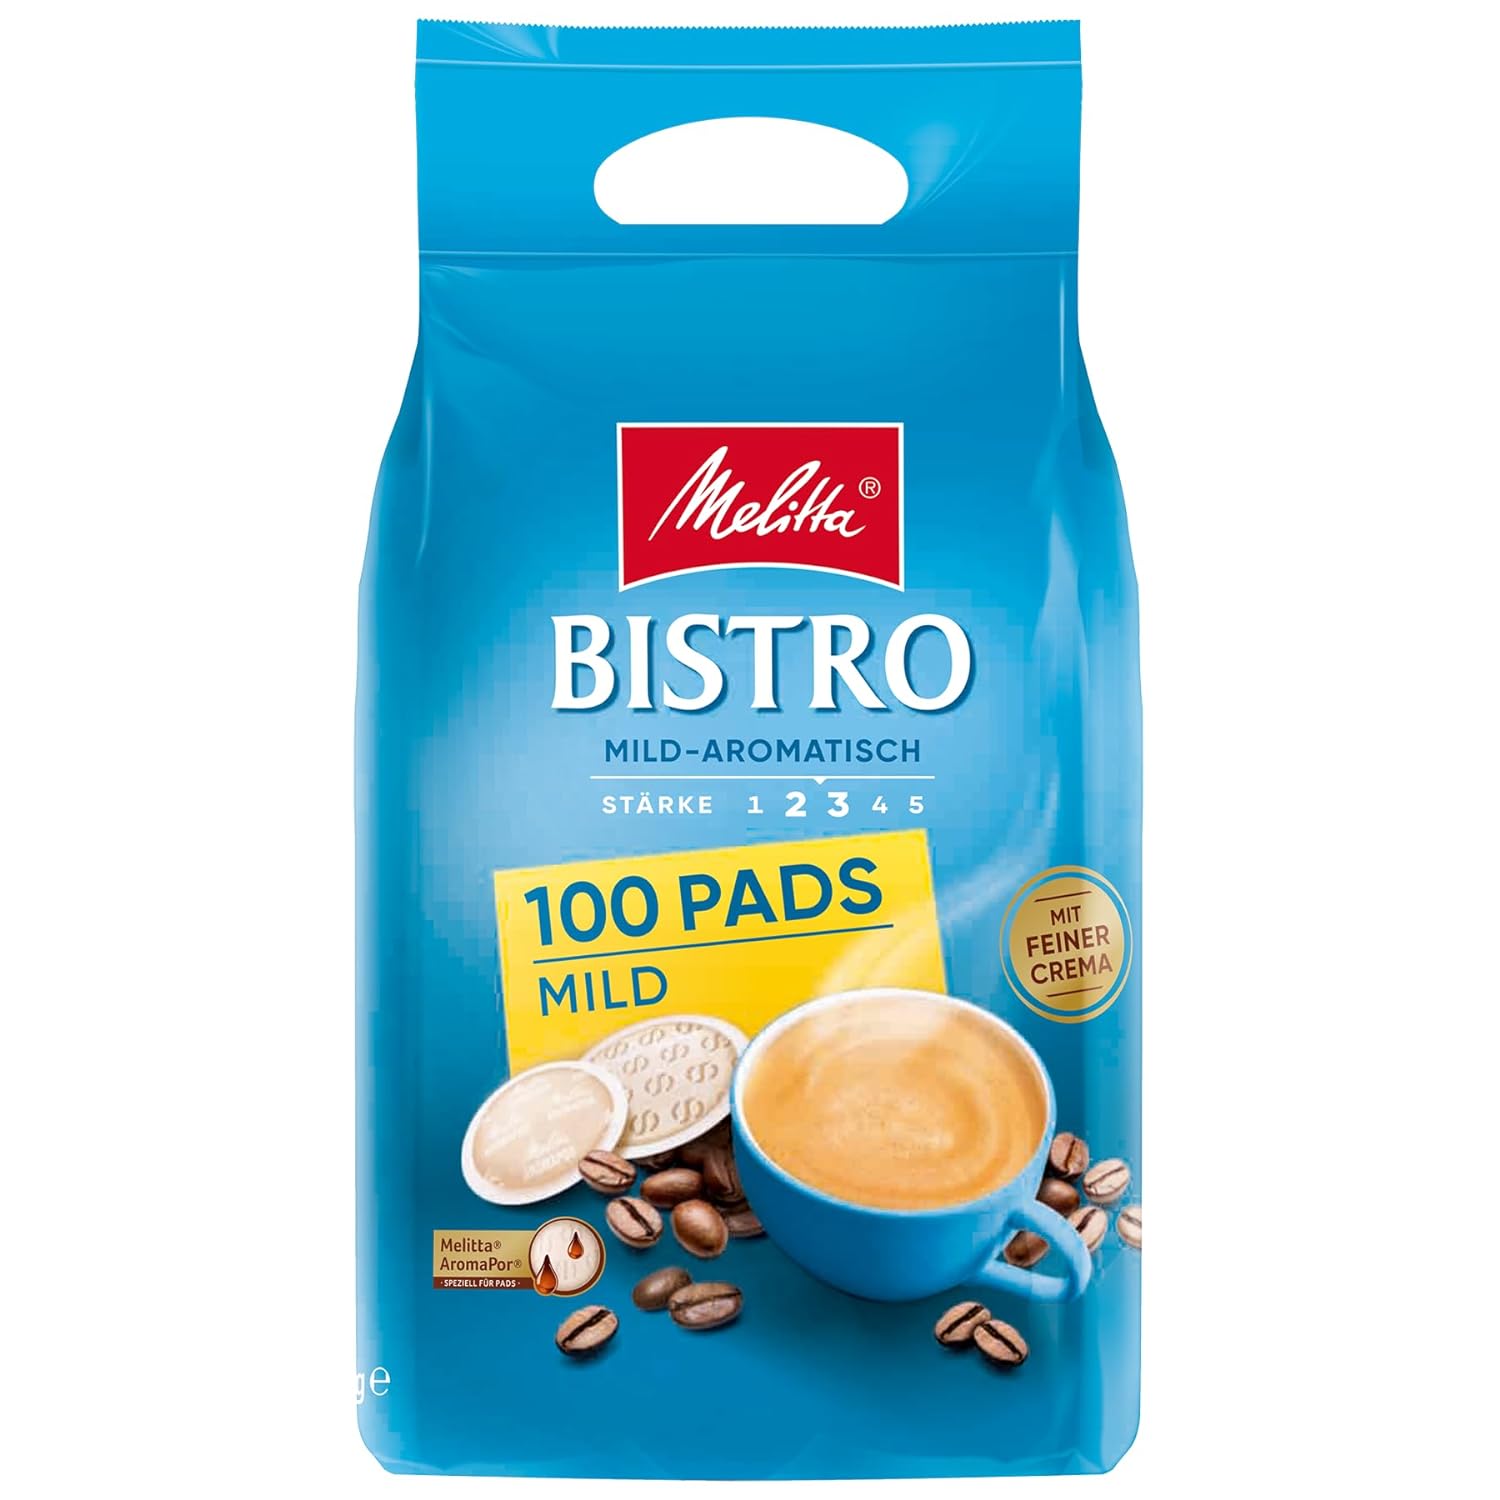 Melitta Café Bistro Roasted Coffee in Coffee Pads, 100 Pads, Coffee Pods for Pad Machine, Gentle Roasting, Roasted in Germany, Mild Aromatic